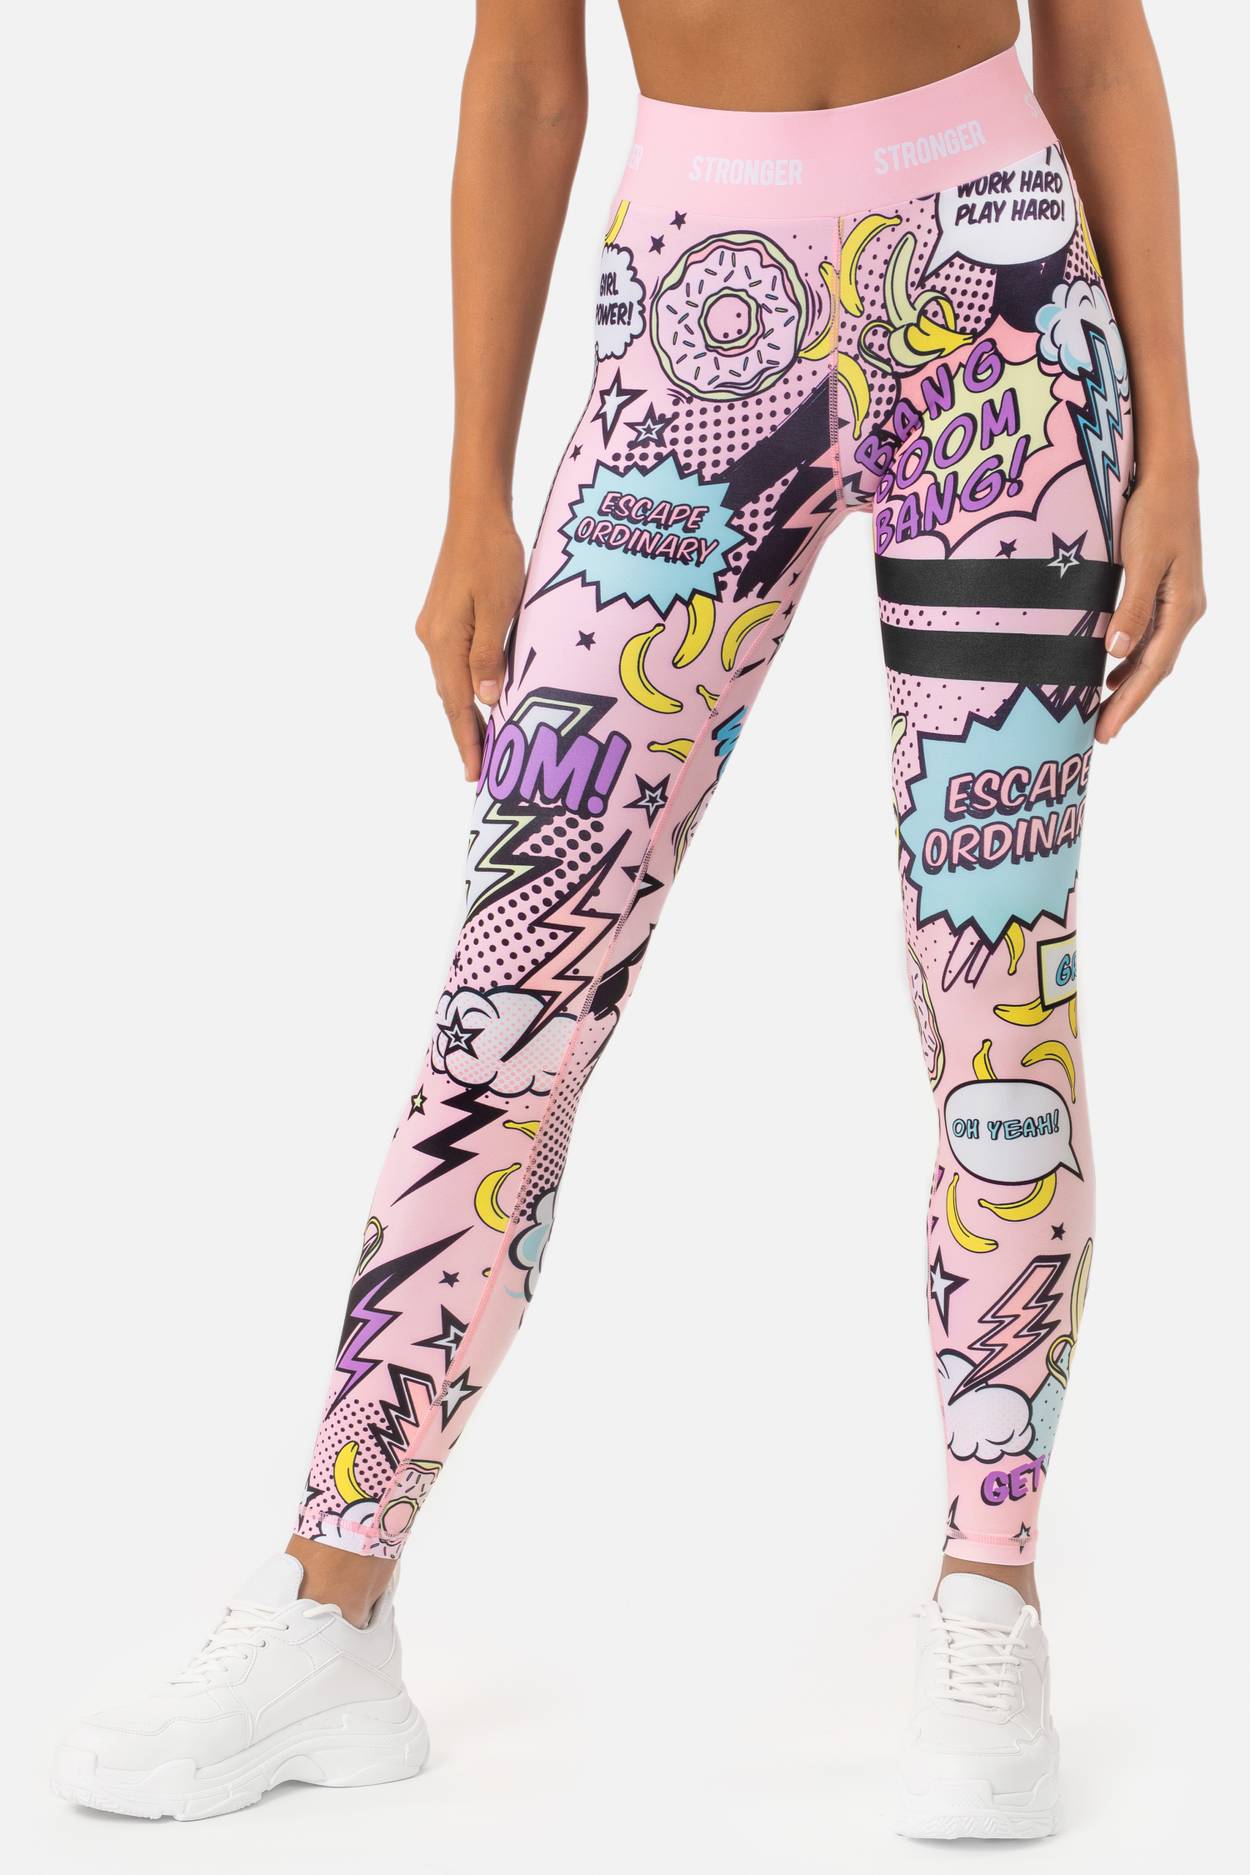 Pin auf Leggings and Tights